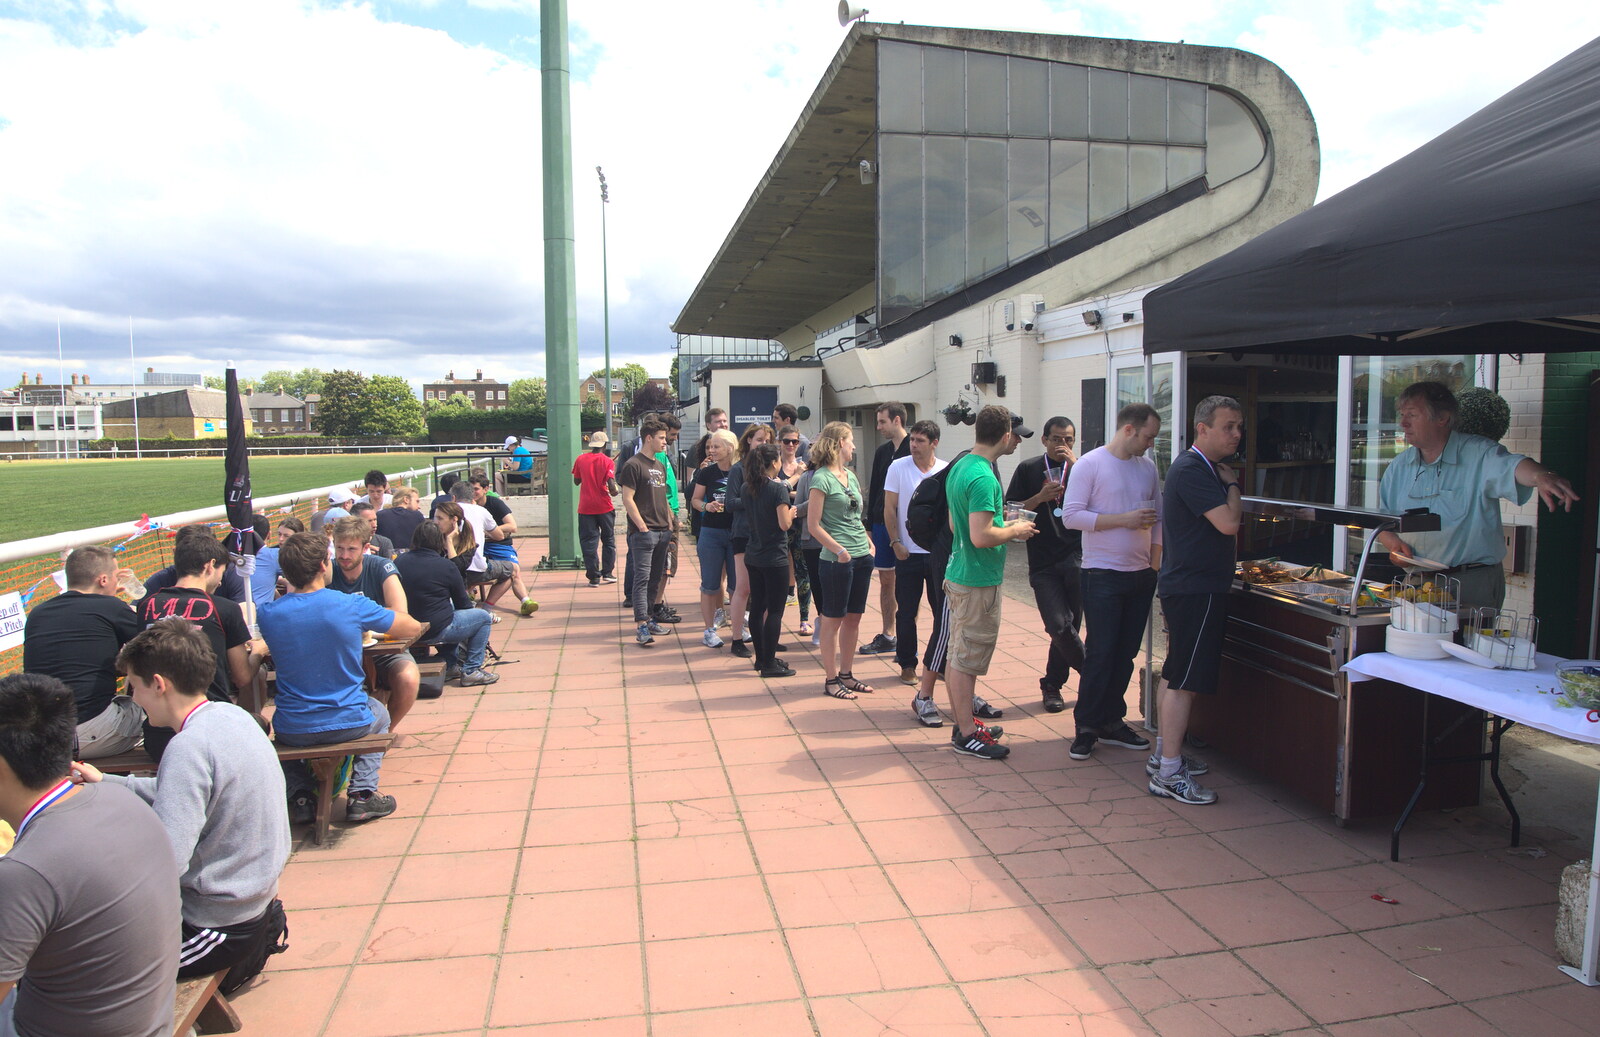 The Barbeque queue from It's a SwiftKey Knockout, Richmond Rugby Club, Richmond, Surrey - 7th July 2015